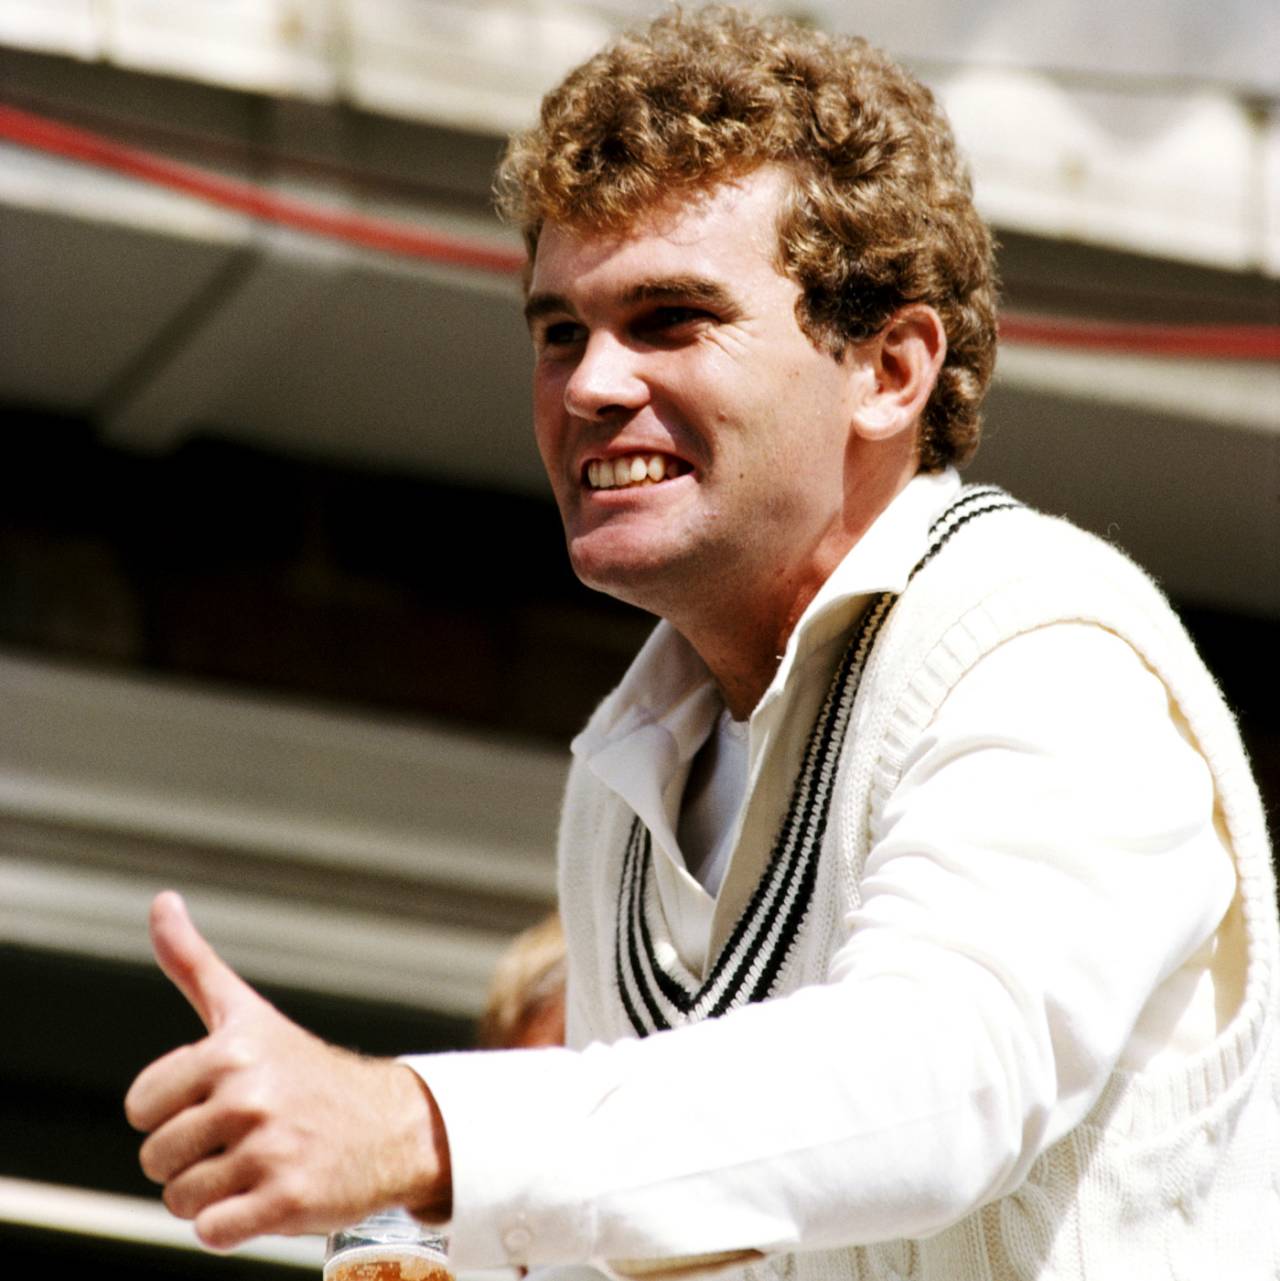 Martin Crowe celebrates their first Test win in England, England v New Zealand, 2nd Test, Leeds, August 1, 1983